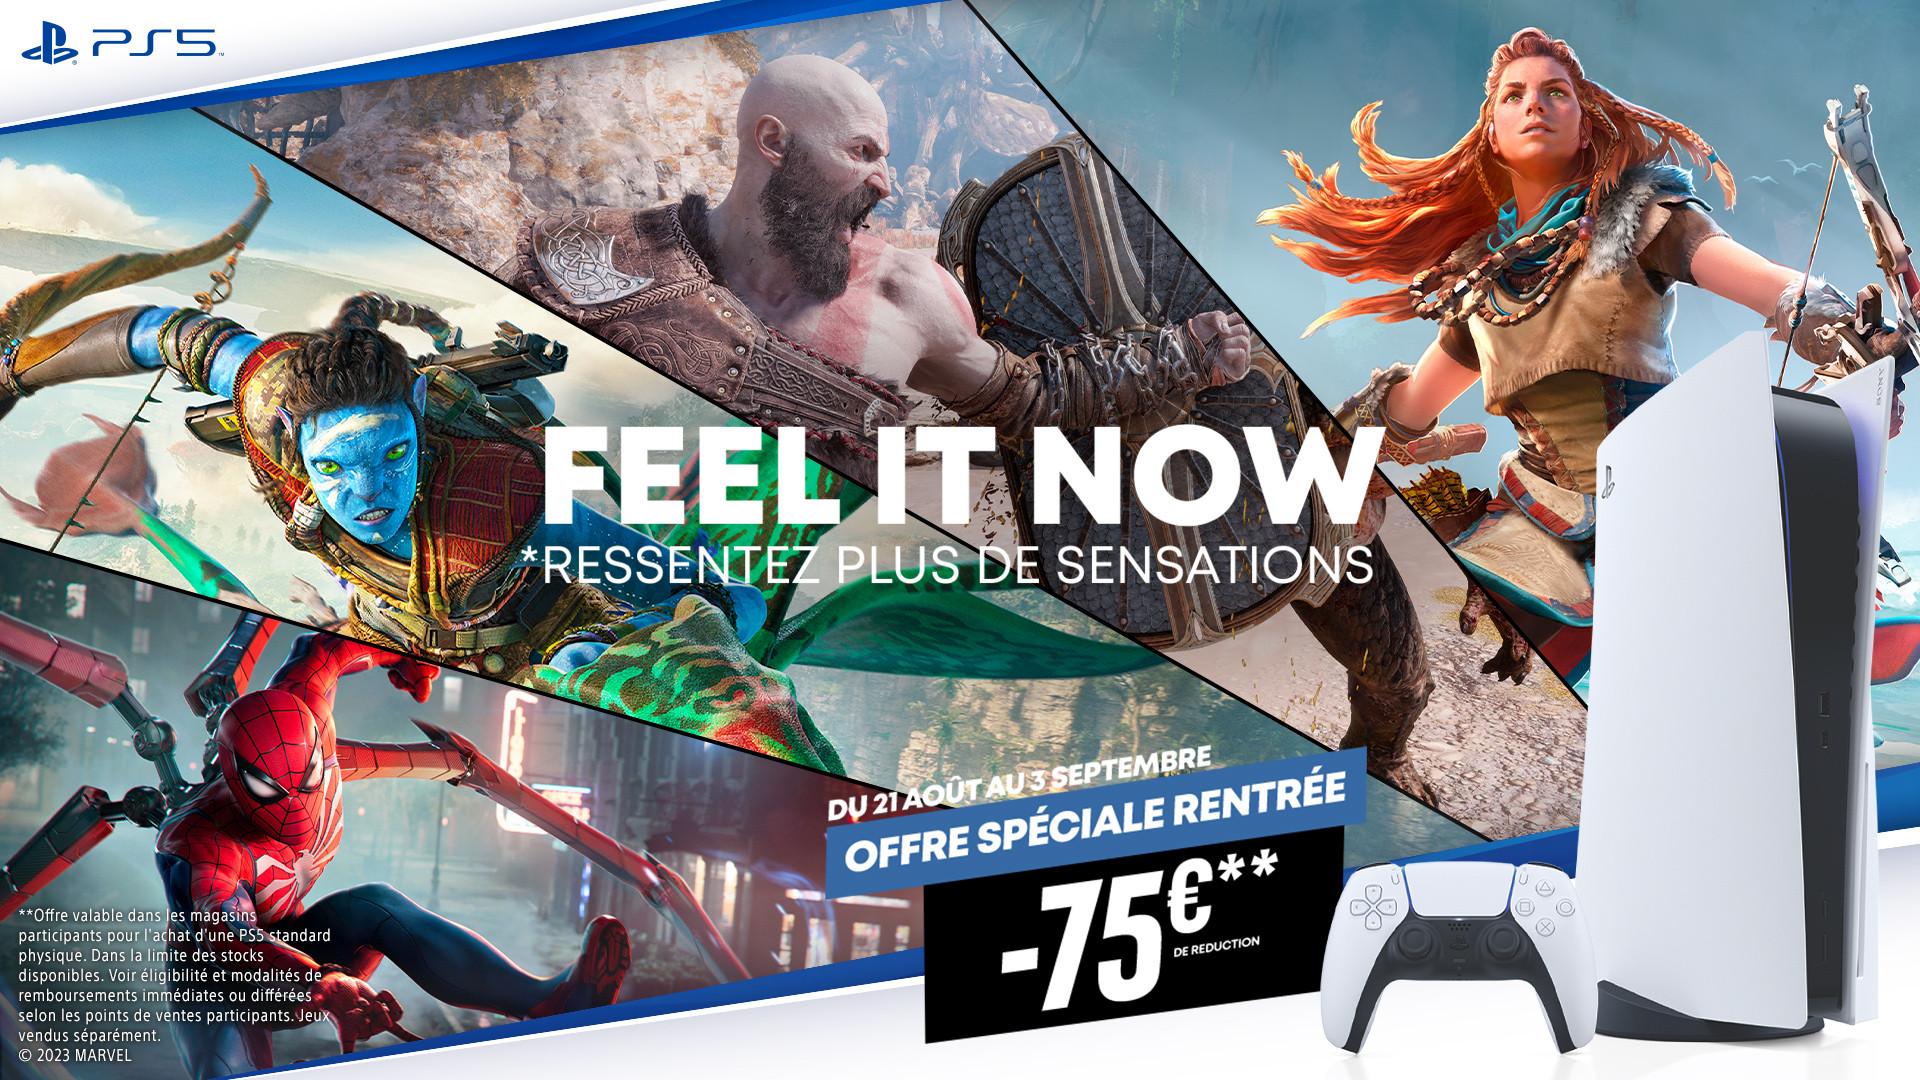 ps5-standard-promotion-rentree